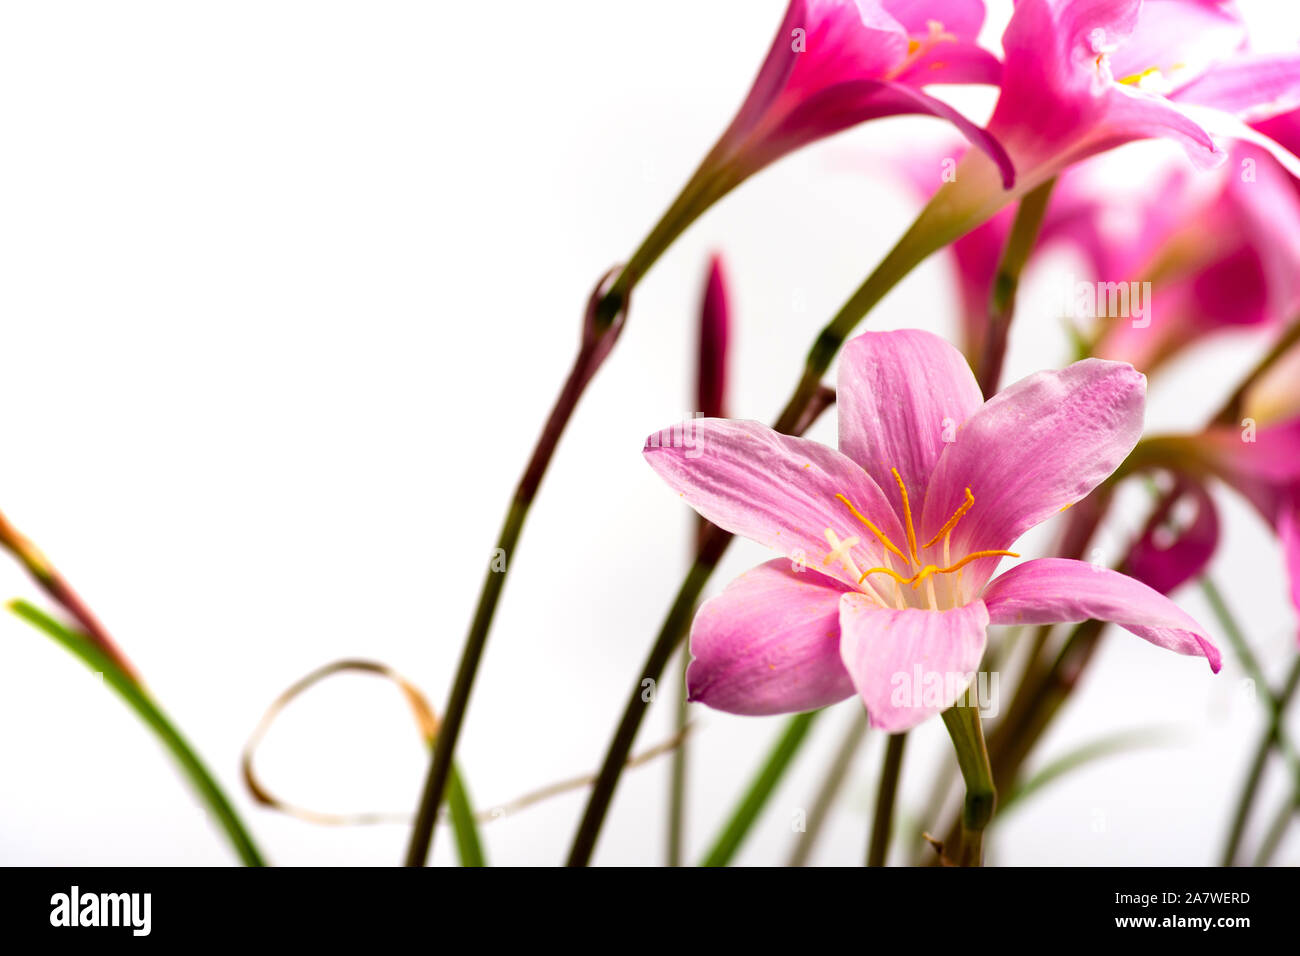 Pink lily flowers in bloom against white background Stock Photo